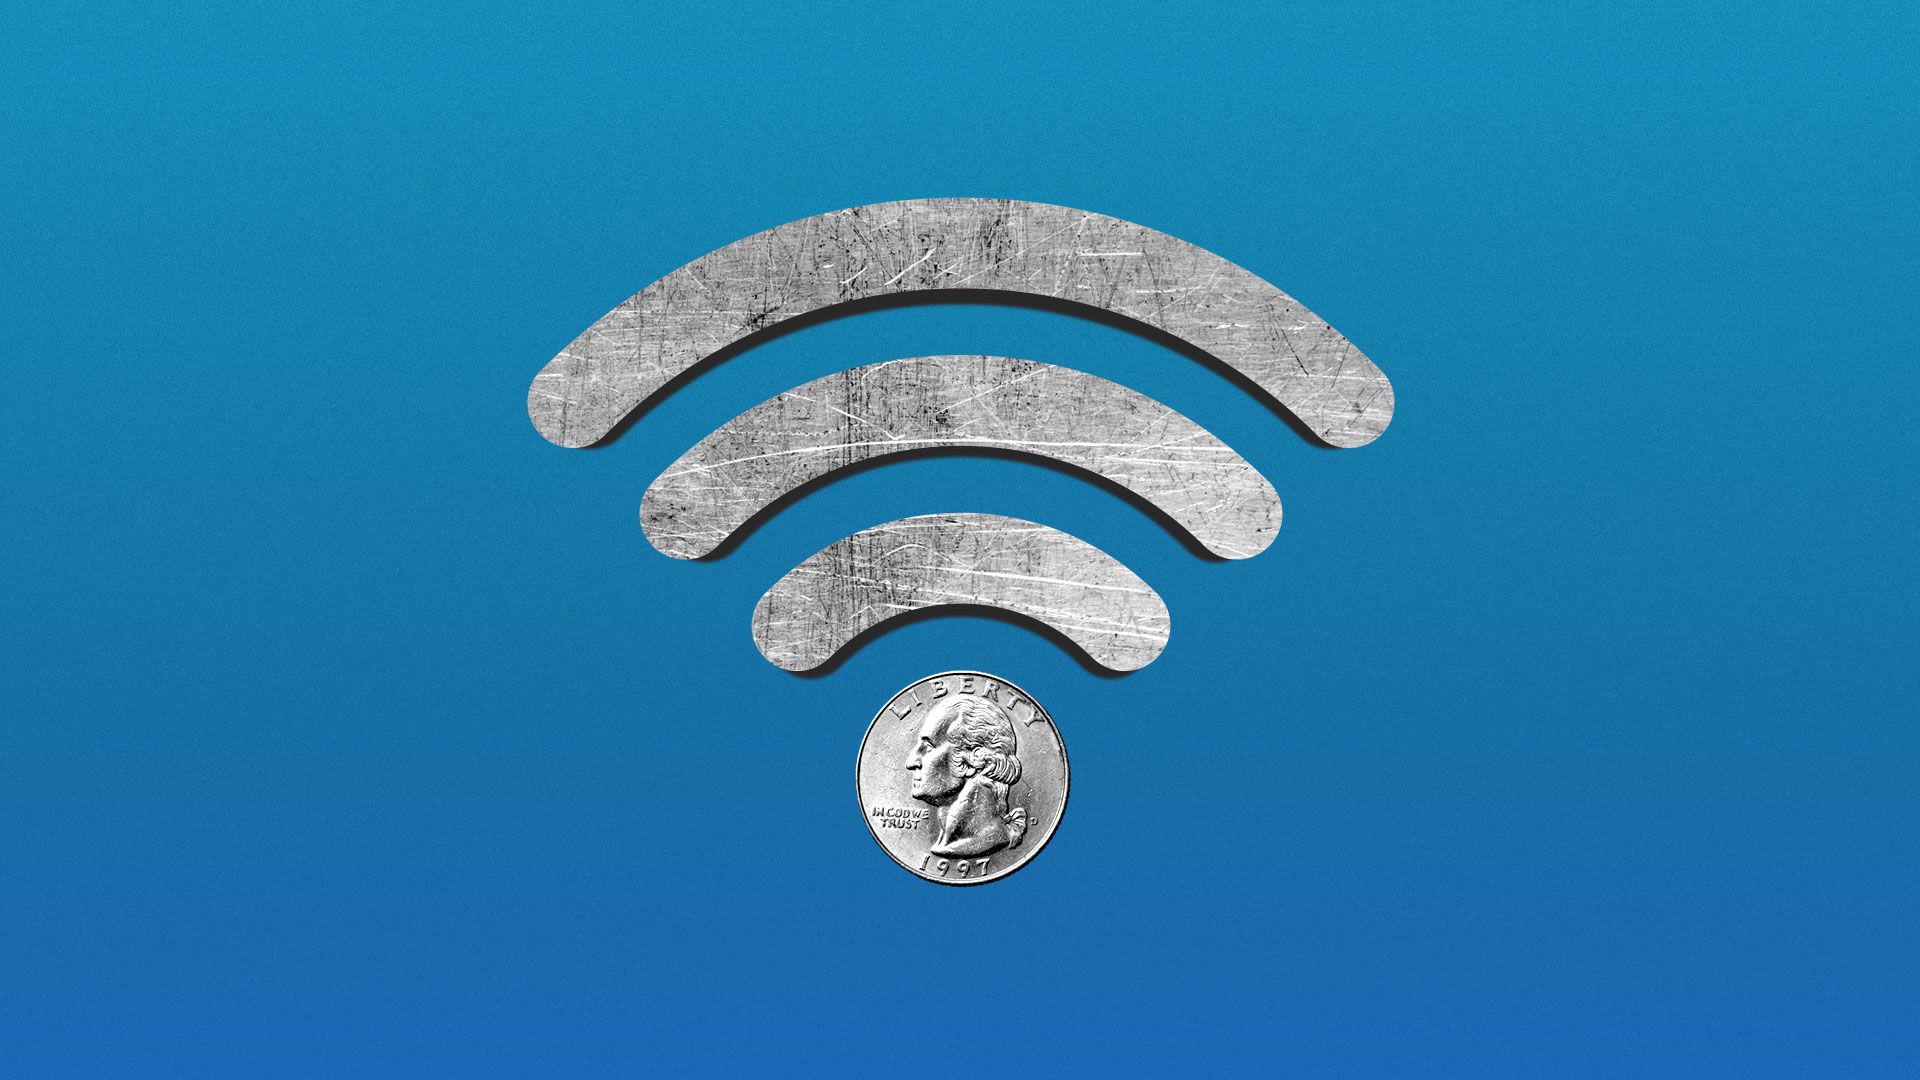 Illustration of quarter as the base of the wi-fi symbol.